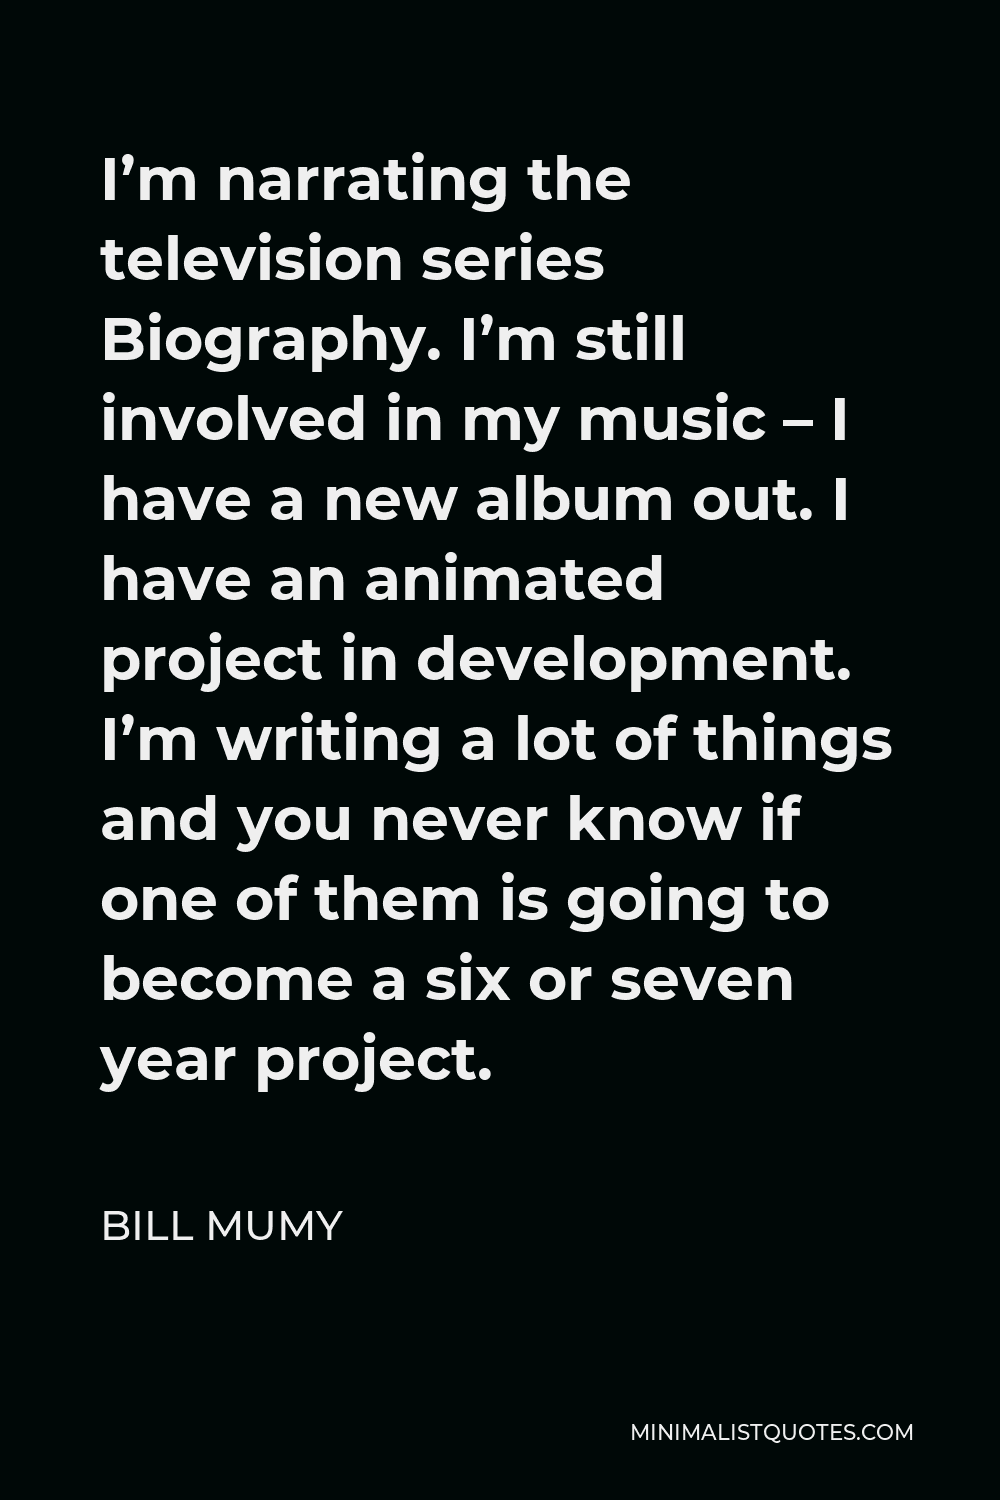 Bill Mumy Quote - I’m narrating the television series Biography. I’m still involved in my music – I have a new album out. I have an animated project in development. I’m writing a lot of things and you never know if one of them is going to become a six or seven year project.